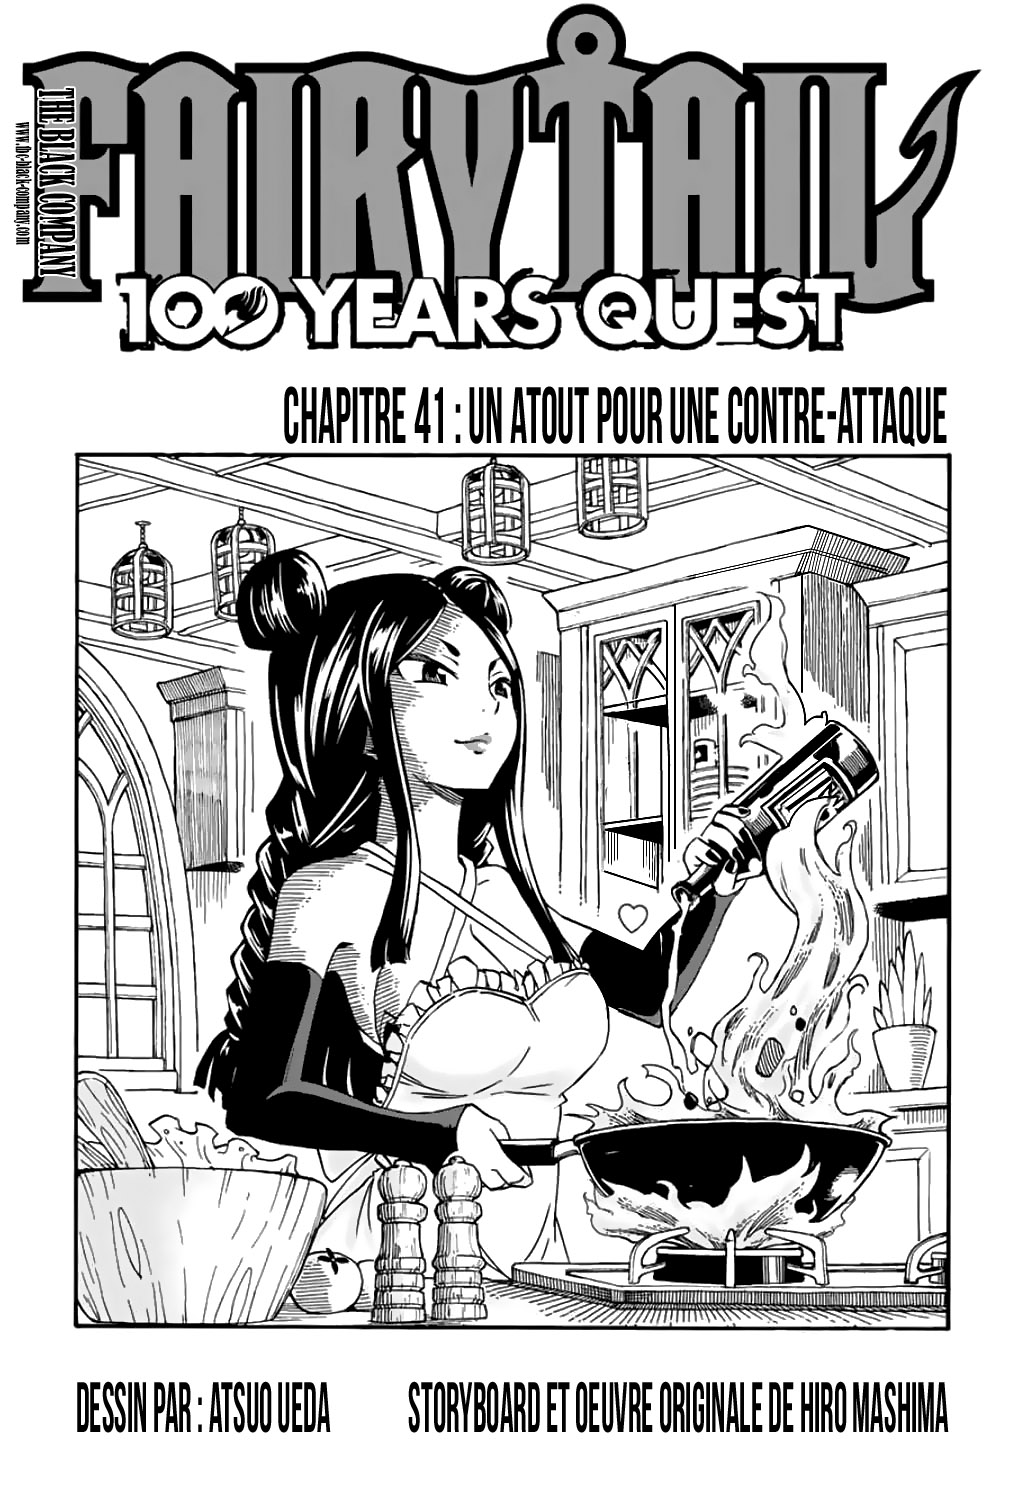 Fairy Tail 100 Years Quest: Chapter chapitre-41 - Page 1